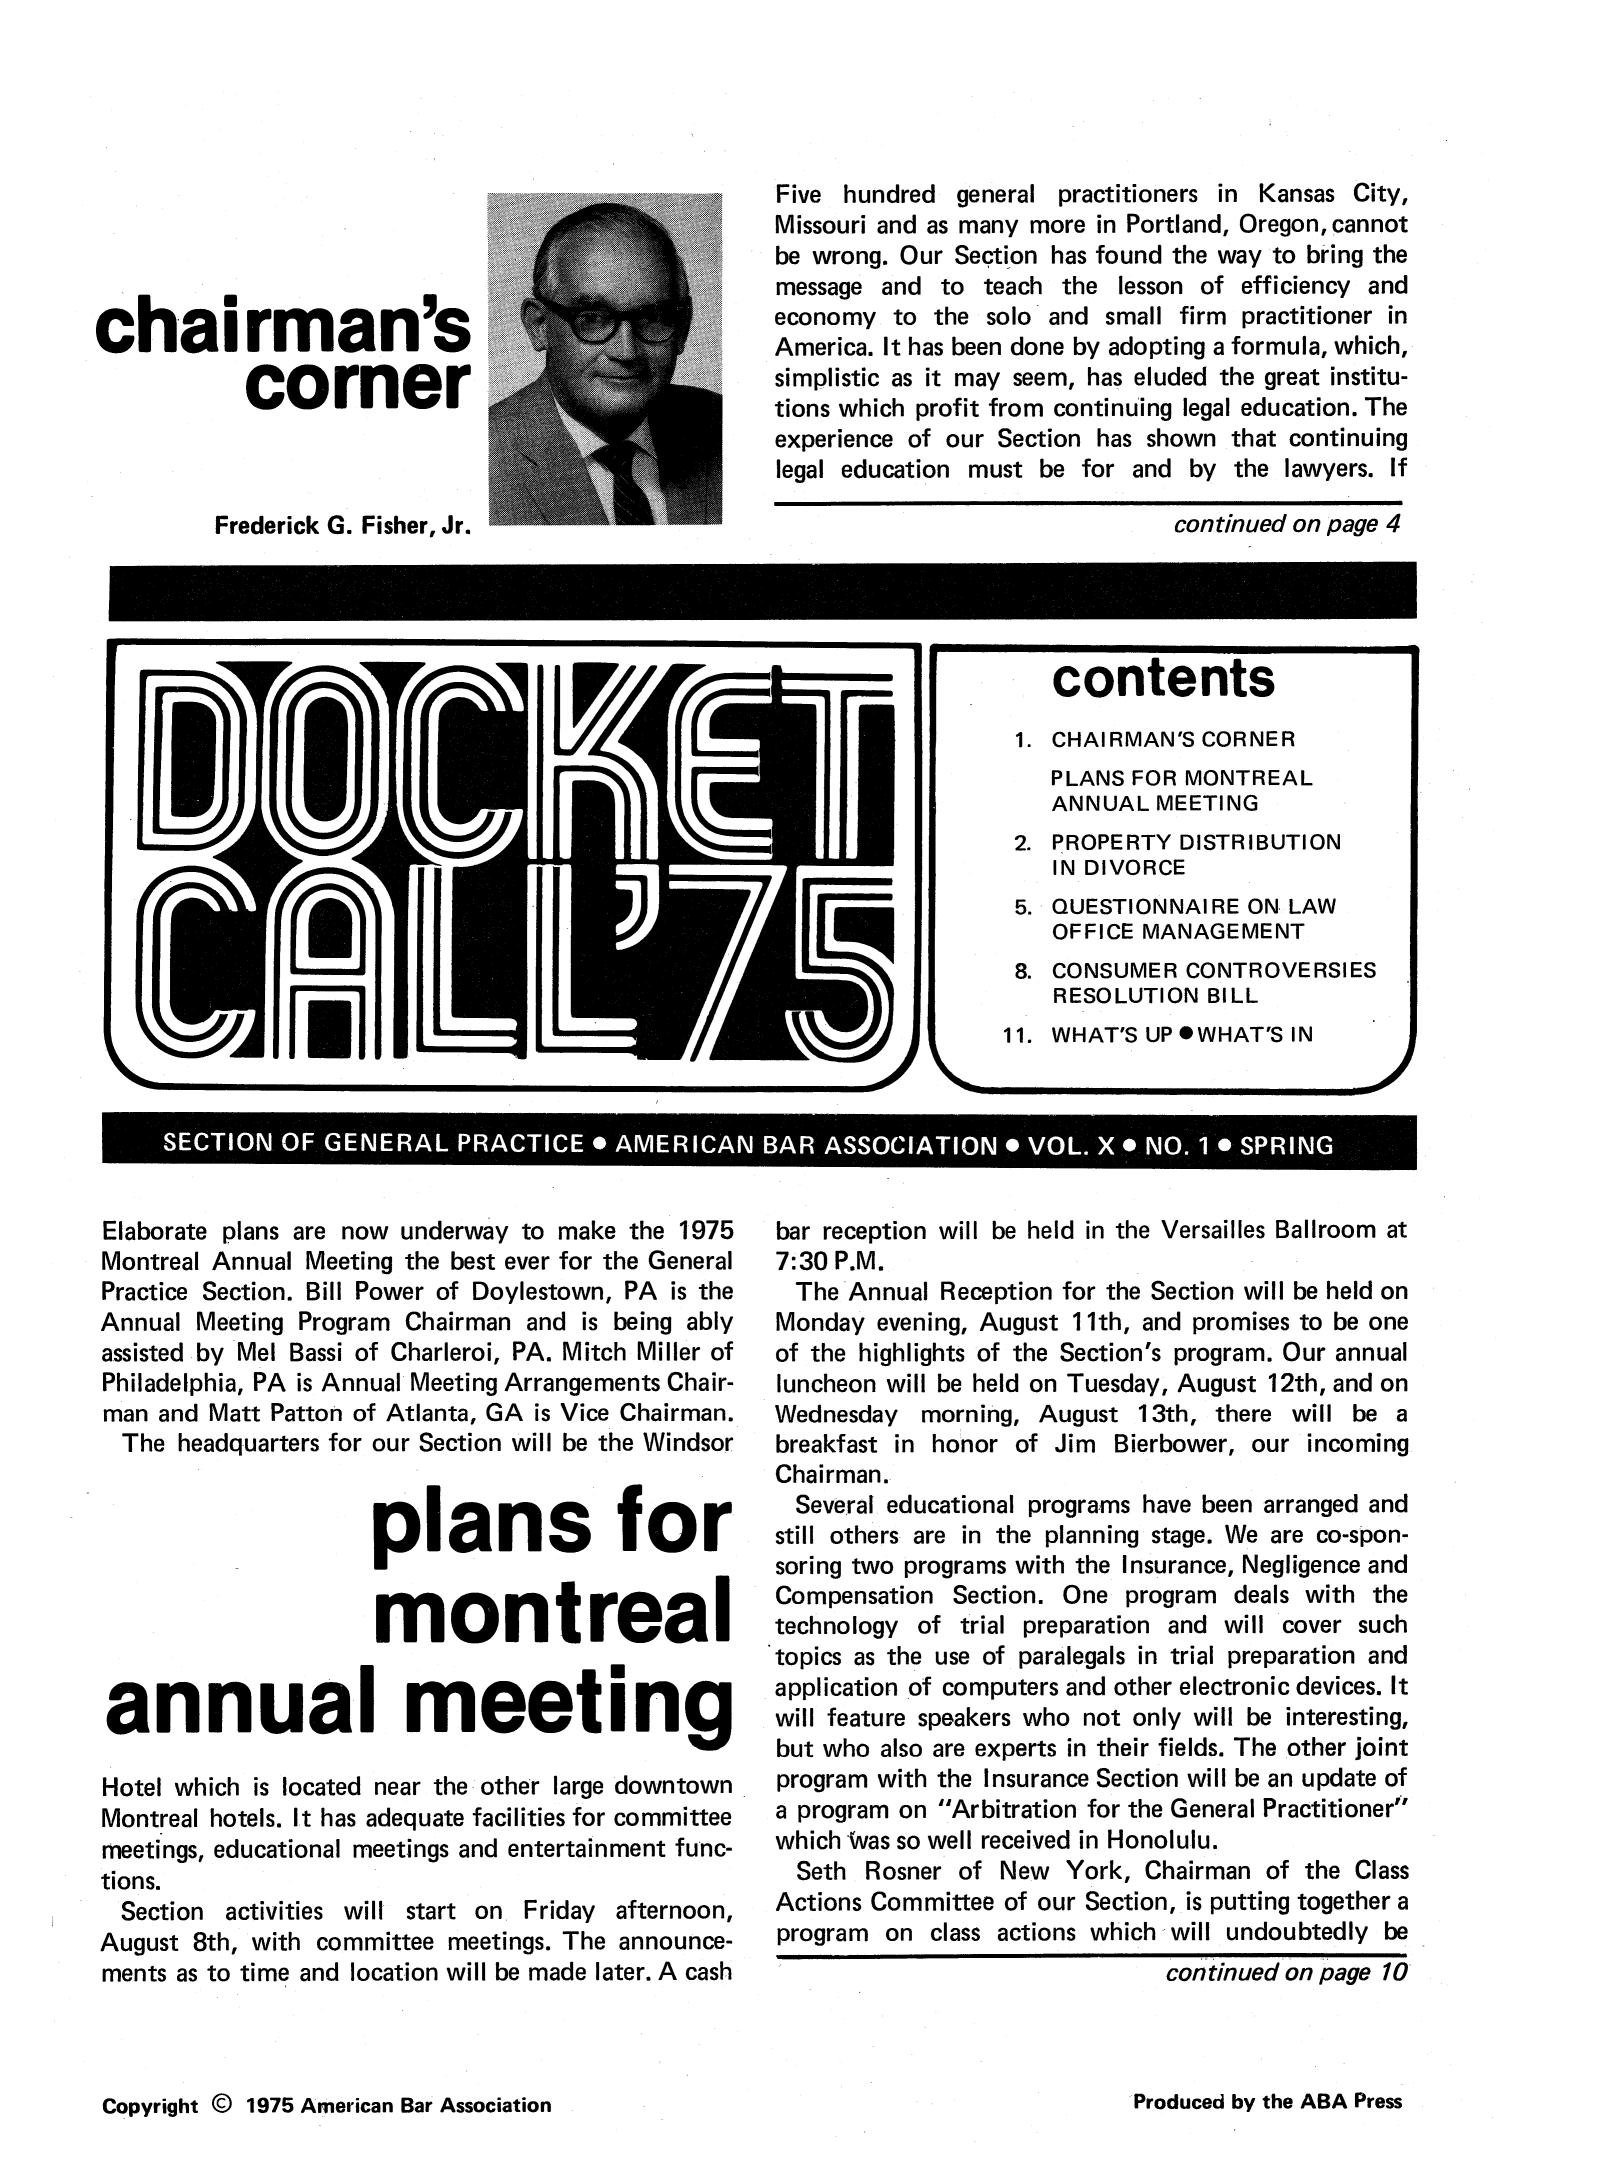 handle is hein.journals/dcktcll10 and id is 1 raw text is: chairman's
corner
Frederick G. Fisher, Jr.

Elaborate plans are now underway to make the 1975
Montreal Annual Meeting the best ever for the General
Practice Section. Bill Power of Doylestown, PA is the
Annual Meeting Program Chairman and is being ably
assisted by Mel Bassi of Charleroi, PA. Mitch Miller of
Philadelphia, PA is Annual Meeting Arrangements Chair-
man and Matt Patton of Atlanta, GA is Vice Chairman.
The headquarters for our Section will be the Windsor
plans for
montreal
annual meeting
Hotel which is located near the other large downtown
Montreal hotels. It has adequate facilities for committee
meetings, educational meetings and entertainment func-
tions.
Section activities will start on Friday afternoon,
August 8th, with committee meetings. The announce-
ments as to time and location will be made later. A cash

Five hundred general practitioners in Kansas City,
Missouri and as many more in Portland, Oregon, cannot
be wrong. Our Section has found the way to bring the
message and to teach the lesson of efficiency and
economy to the solo and small firm practitioner in
America. It has been done by adopting a formula, which,
simplistic as it may seem, has eluded the great institu-
tions which profit from continuing legal education. The
experience of our Section has shown that continuing
legal education must be for and by the lawyers. If
continued on page 4

bar reception will be held in the Versailles Ballroom at
7:30 P.M.
The Annual Reception for the Section will be held on
Monday evening, August 11th, and promises to be one
of the highlights of the Section's program. Our annual
luncheon will be held on Tuesday, August 12th, and on
Wednesday morning, August 13th, there will be a
breakfast in honor of Jim Bierbower, our incoming
Chairman.
Several educational programs have been arranged and
still others are in the planning stage. We are co-spon-
soring two programs with the Insurance, Negligence and
Compensation Section. One program deals with the
technology of trial preparation and will cover such
topics as the use of paralegals in trial preparation and
application of computers and other electronic devices. It
will feature speakers who not only will be interesting,
but who also are experts in their fields. The other joint
program with the Insurance Section will be an update of
a program on Arbitration for the General Practitioner
which Was so well received in Honolulu.
Seth Rosner of New York, Chairman of the Class
Actions Committee of our Section, is putting together a
program on class actions which will undoubtedly be
continued on page 10

Copyright © 1975 American Bar Association

contents
1. CHAIRMAN'S CORNER
PLANS FOR MONTREAL
ANNUAL MEETING
2. PROPERTY DISTRIBUTION
IN DIVORCE
5. QUESTIONNAIRE ON LAW
OFFICE MANAGEMENT
8. CONSUMER CONTROVERSIES
RESOLUTION BILL
11. WHAT'S UP * WHAT'S IN

'~'AI I  I U  ~ L W~m~-M

SECTION OF GENERAL PRACTICE * AMERICAN BAR ASSOCIATION* VOL. X* NO. 1* SPRING

Produced by the ABA Press


